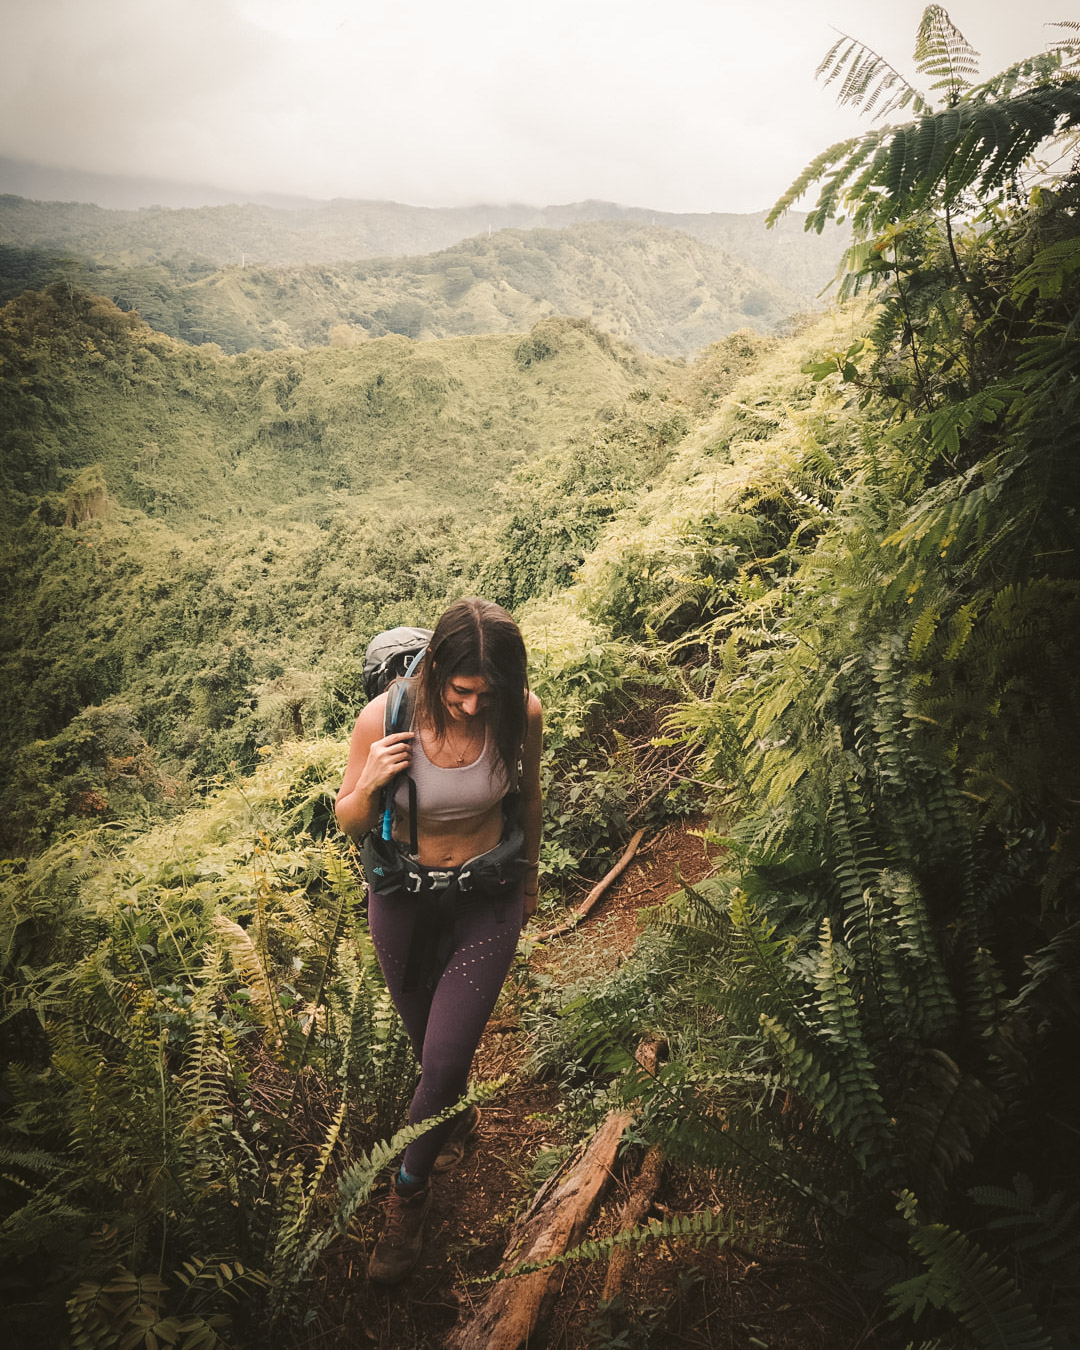 Kauai Camping: What To Pack For Your Adventure - Dani The Explorer